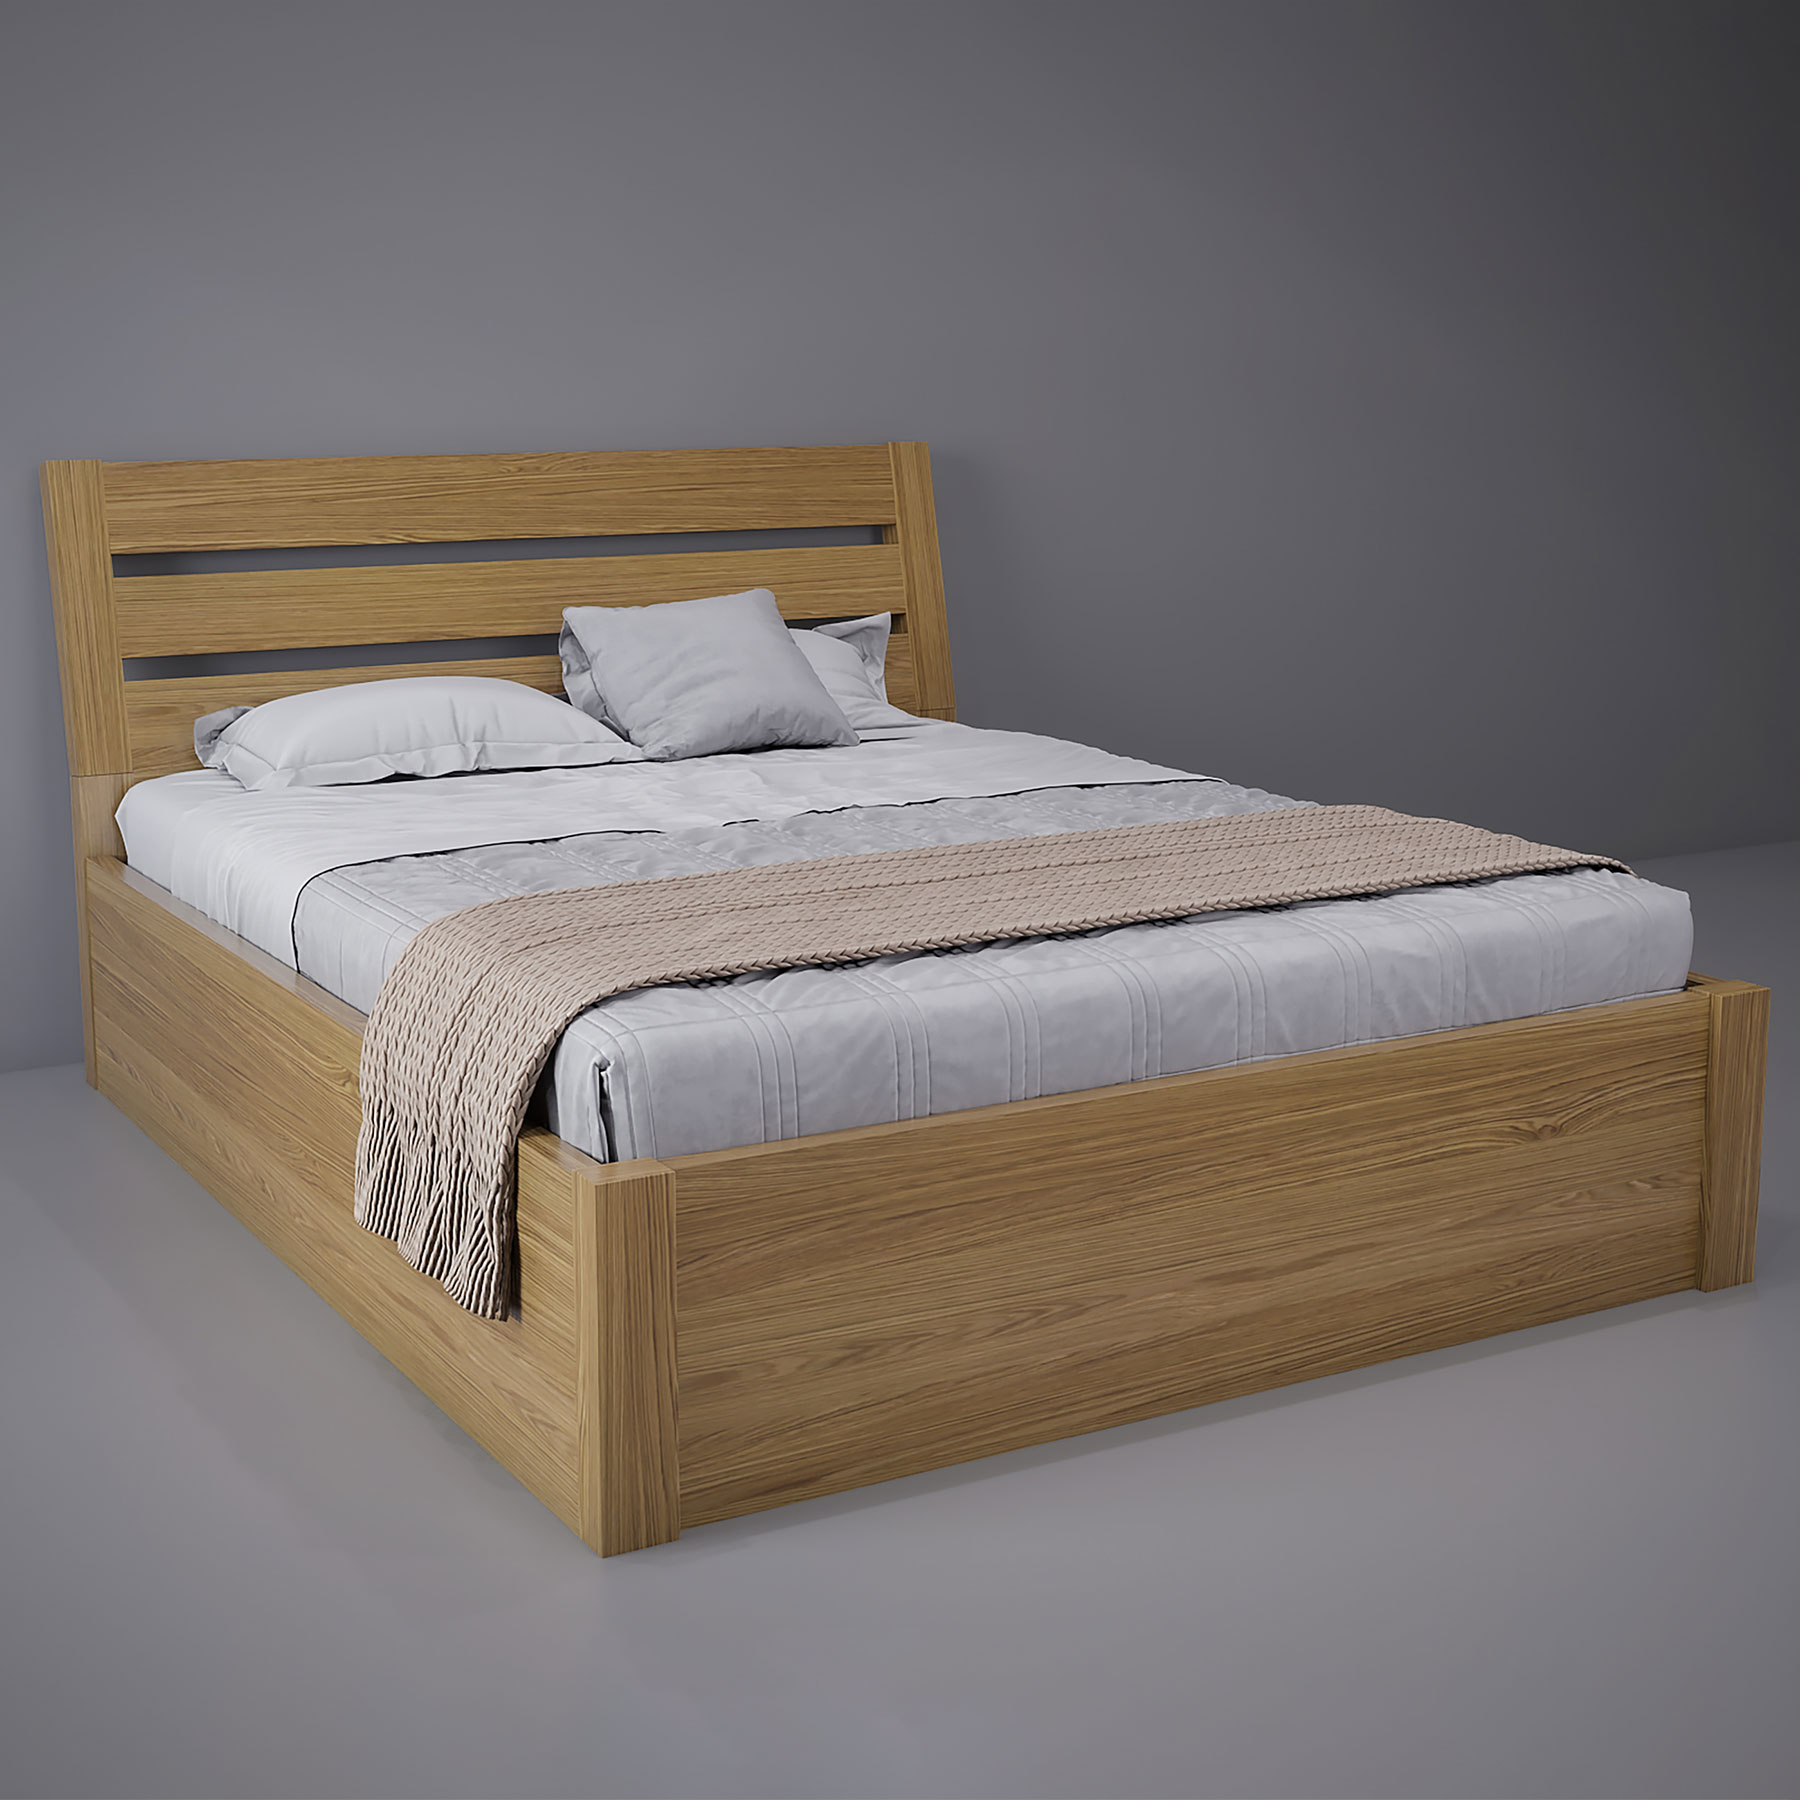 Double bed from the Bergen collection